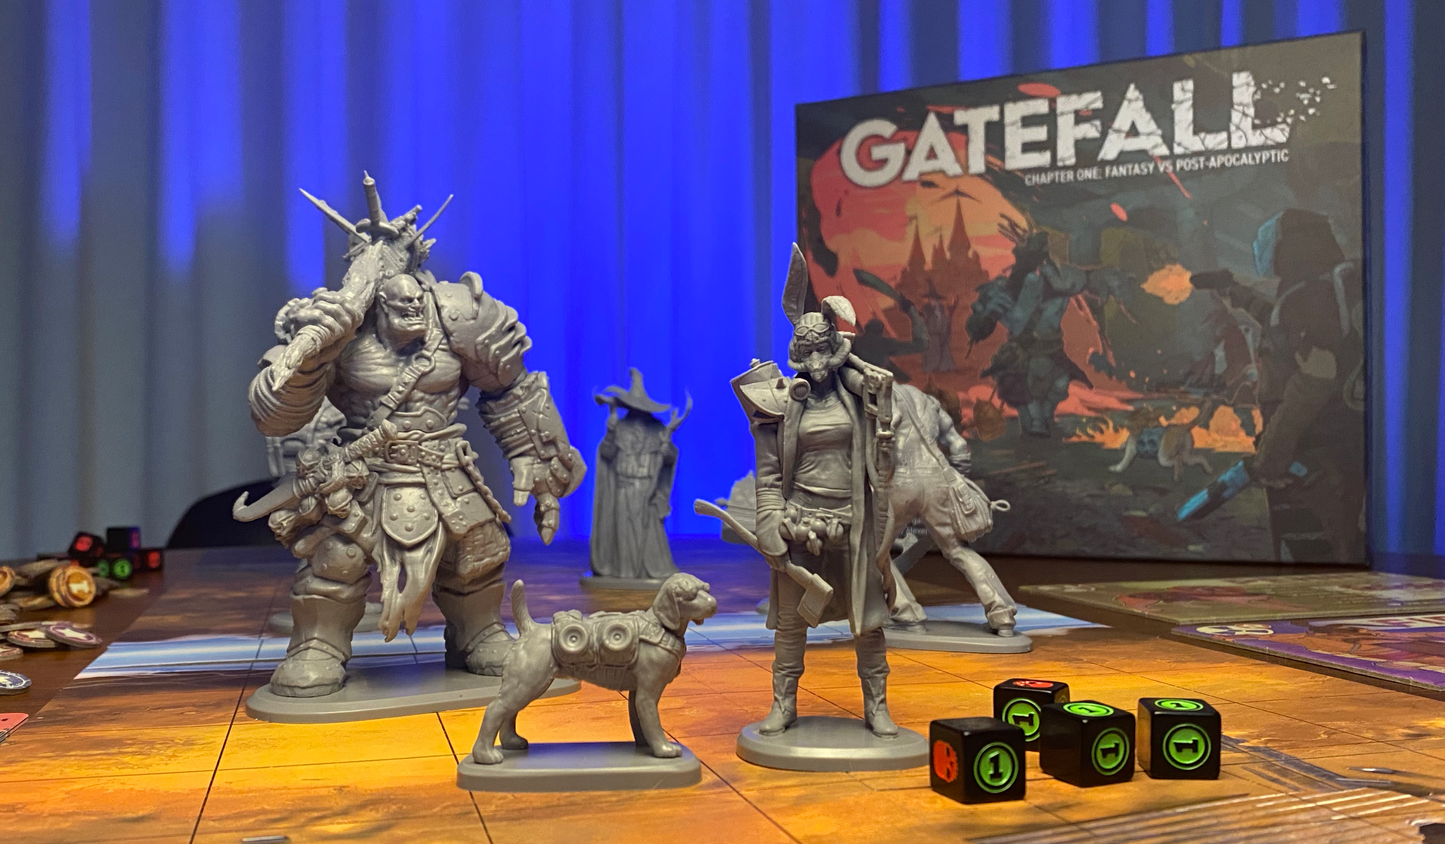 Gatefall Chapter One: Fantasy vs Post-Apocalyptic Miniatures Strategy Game